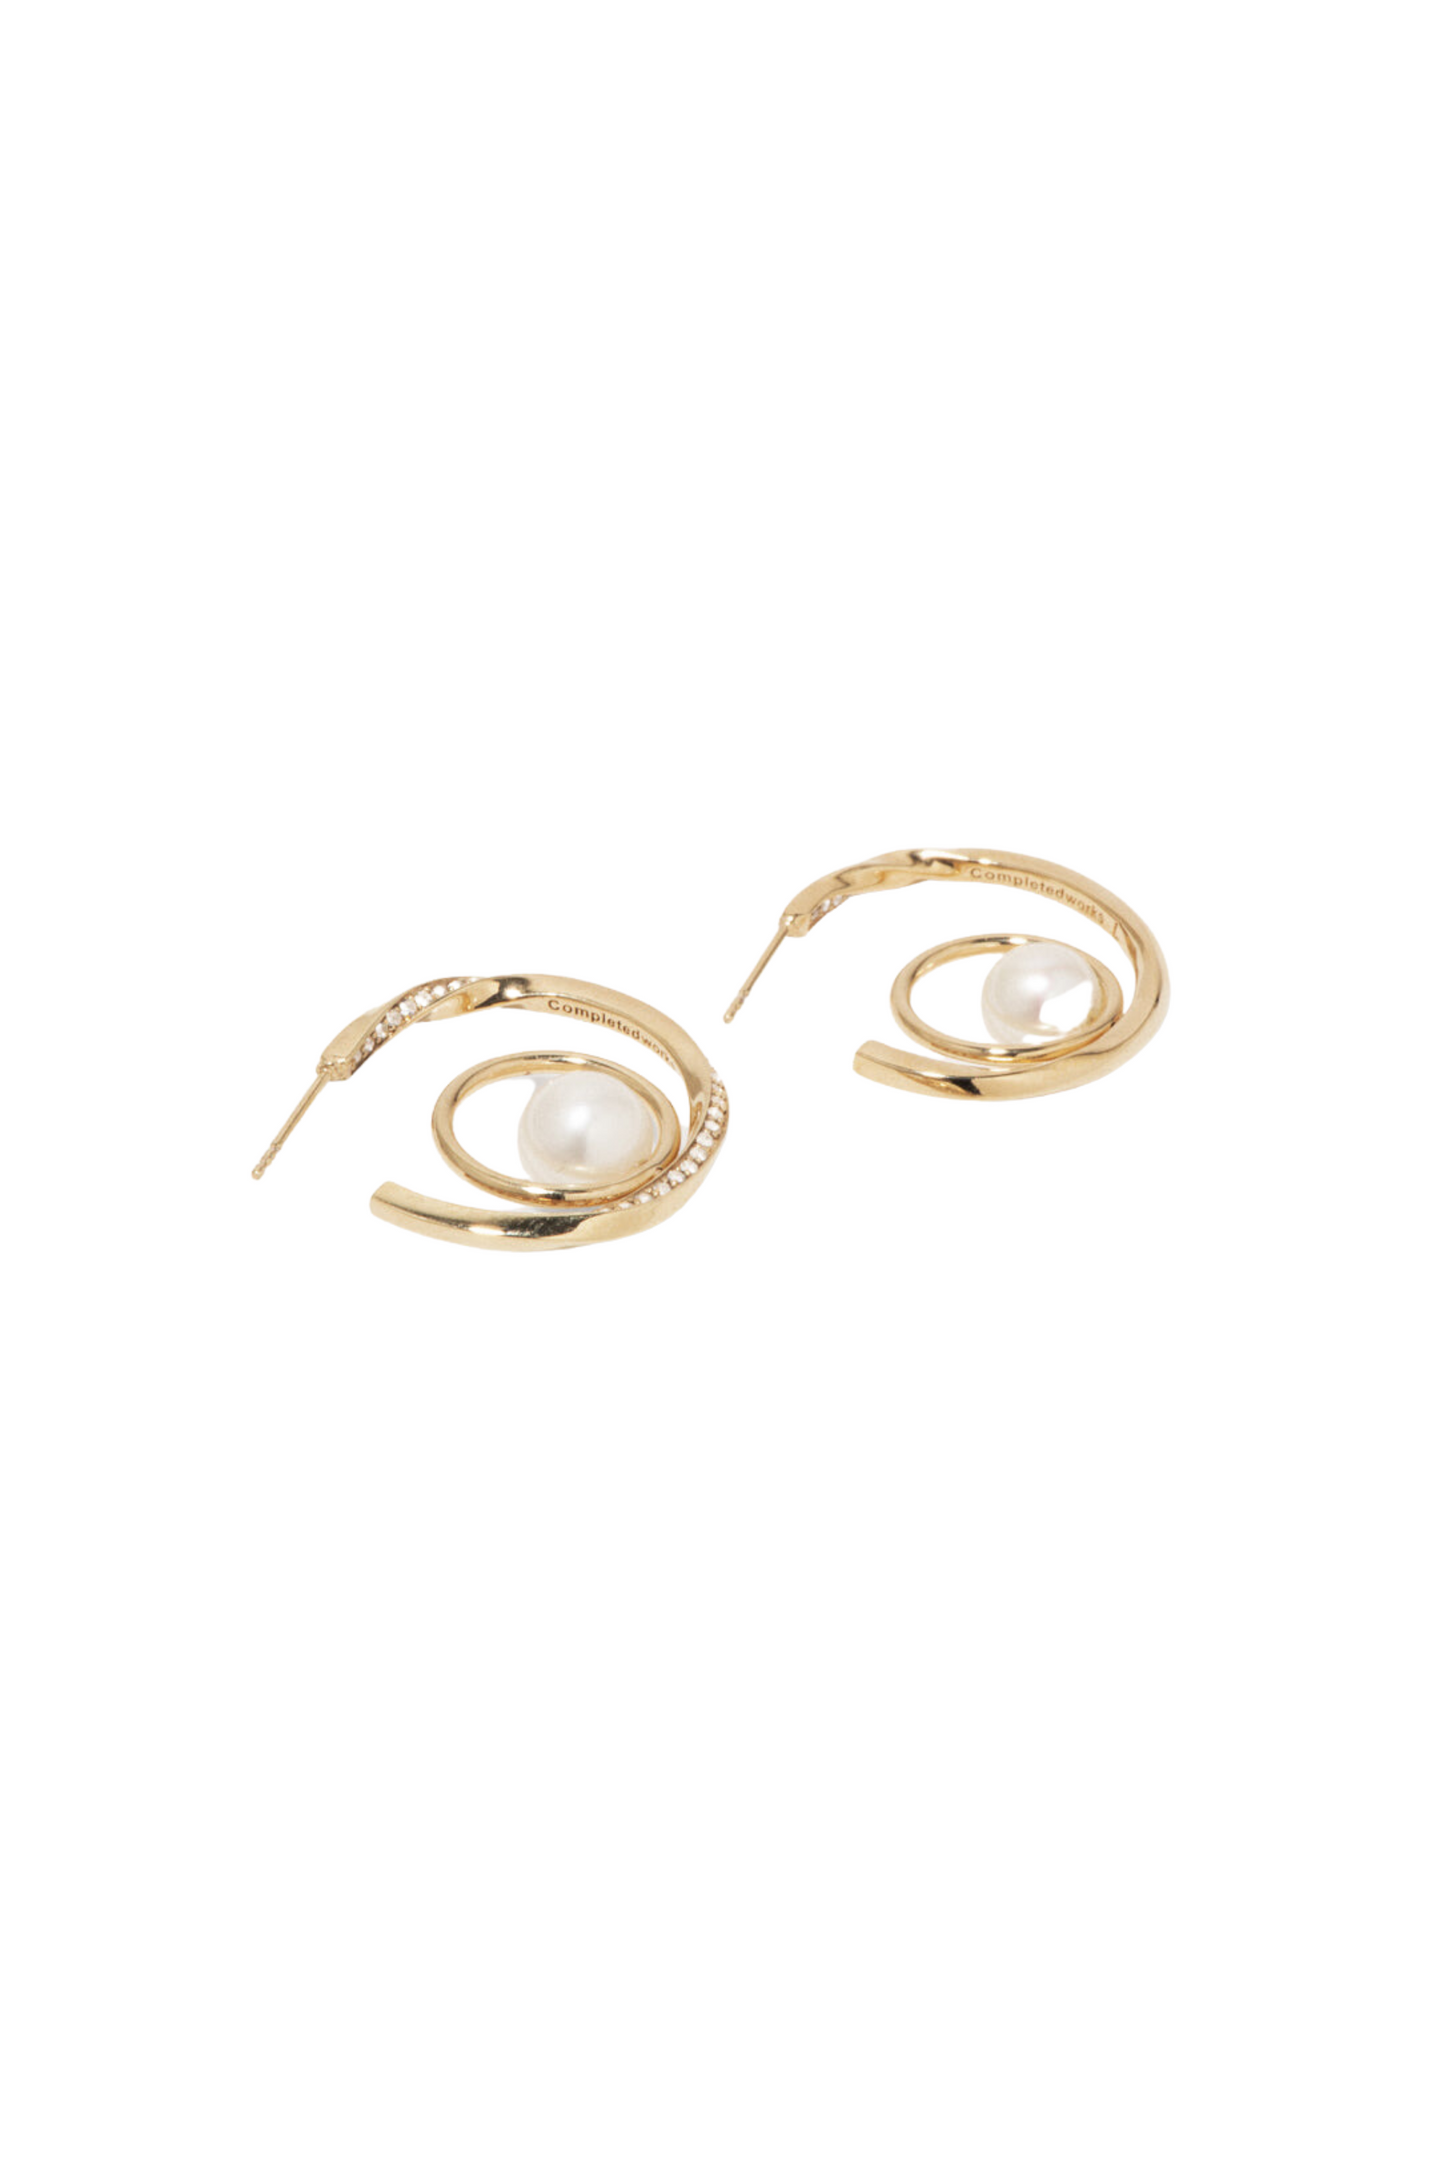 COMPLETED WORKS // GOLD VERMEIL WITH PEARL AND WHITE TOPAZ HOOPS